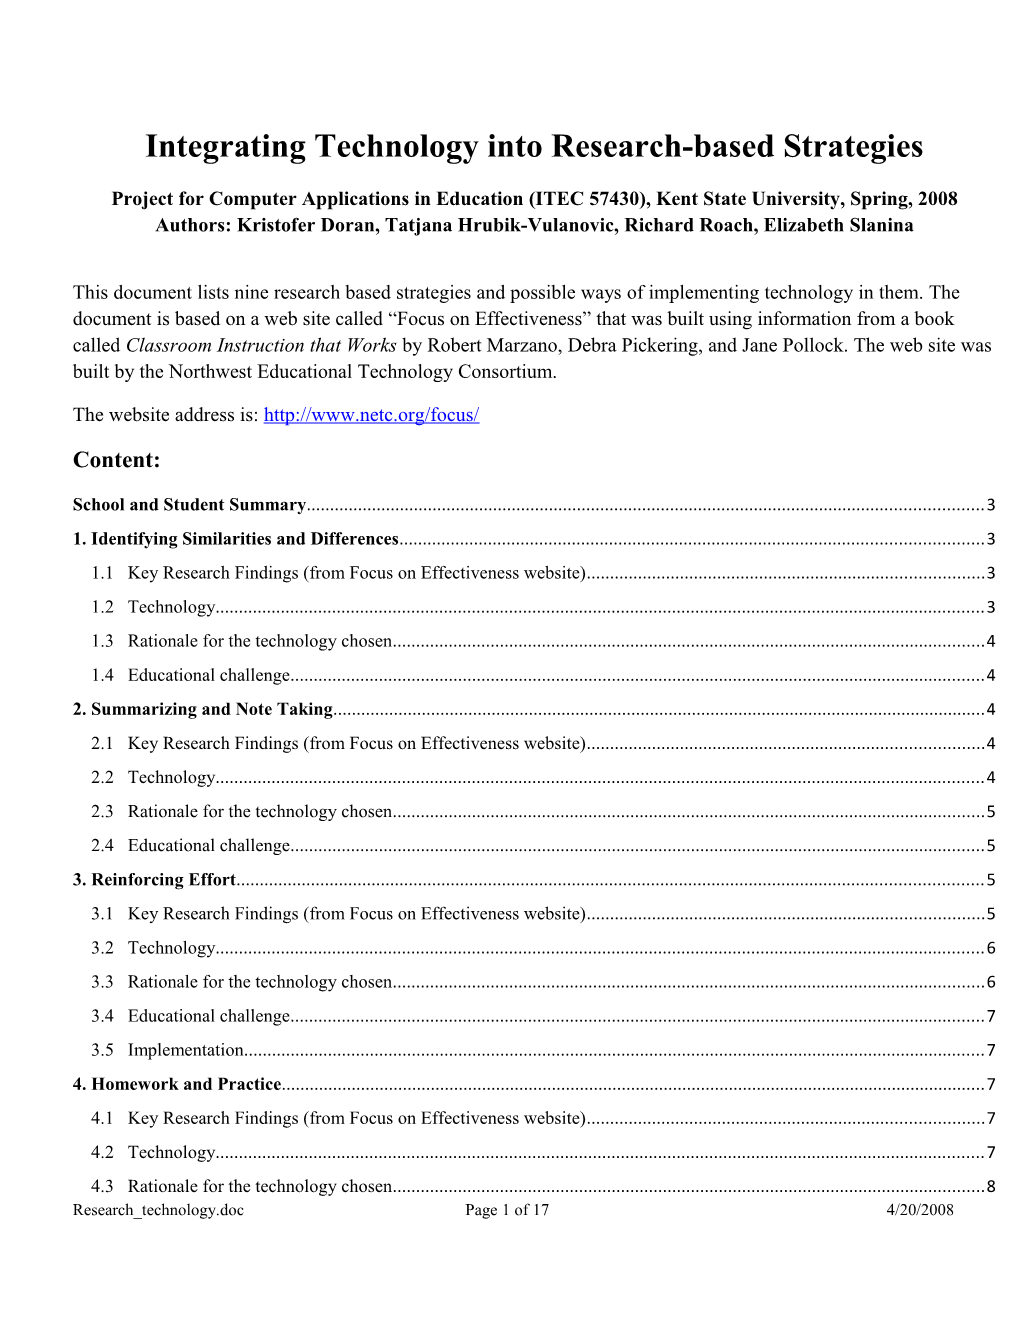 Integrating Technology Into Research-Based Strategies